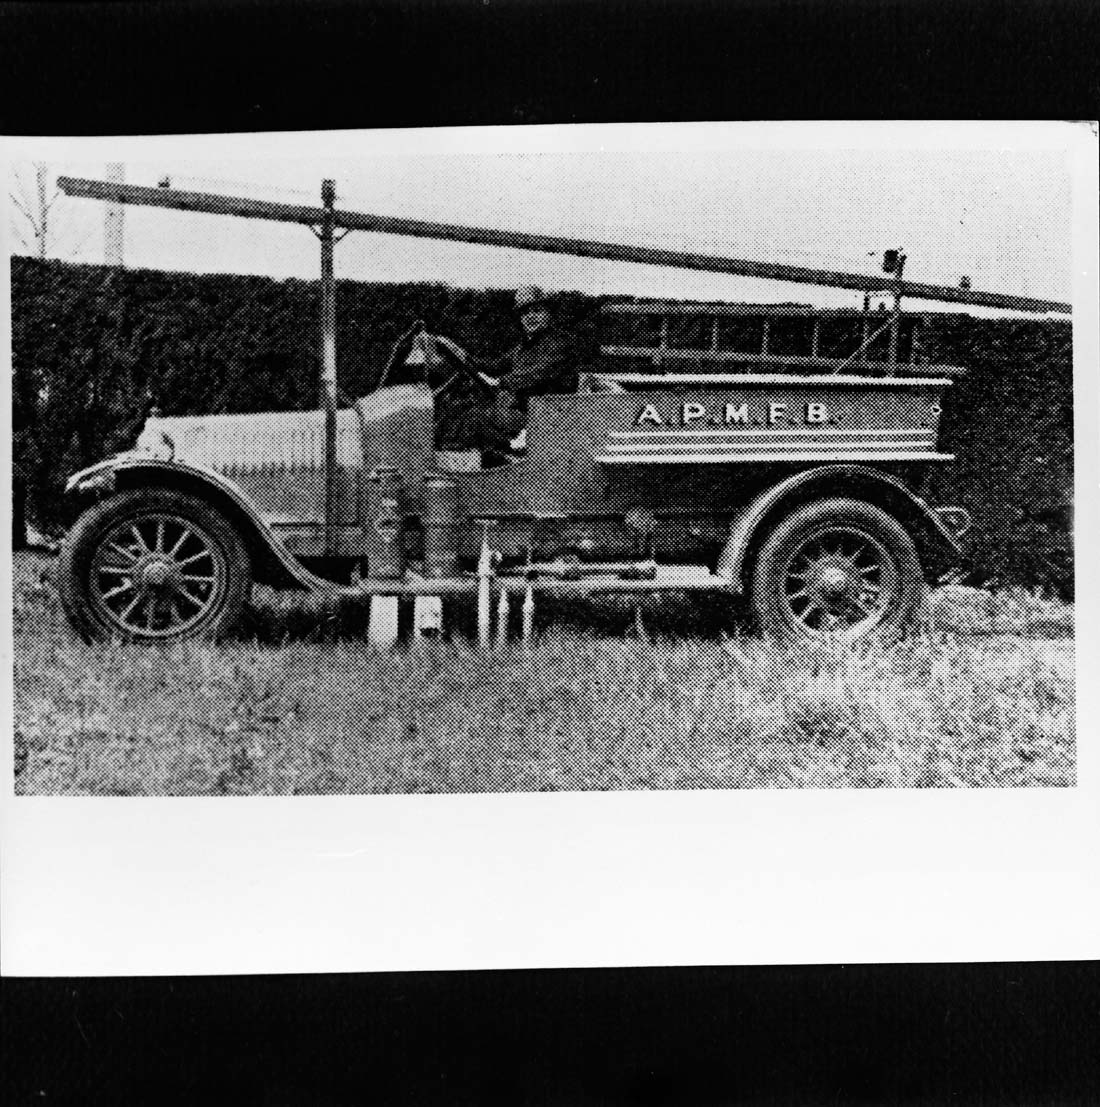 Image of Paper Mills fire truck